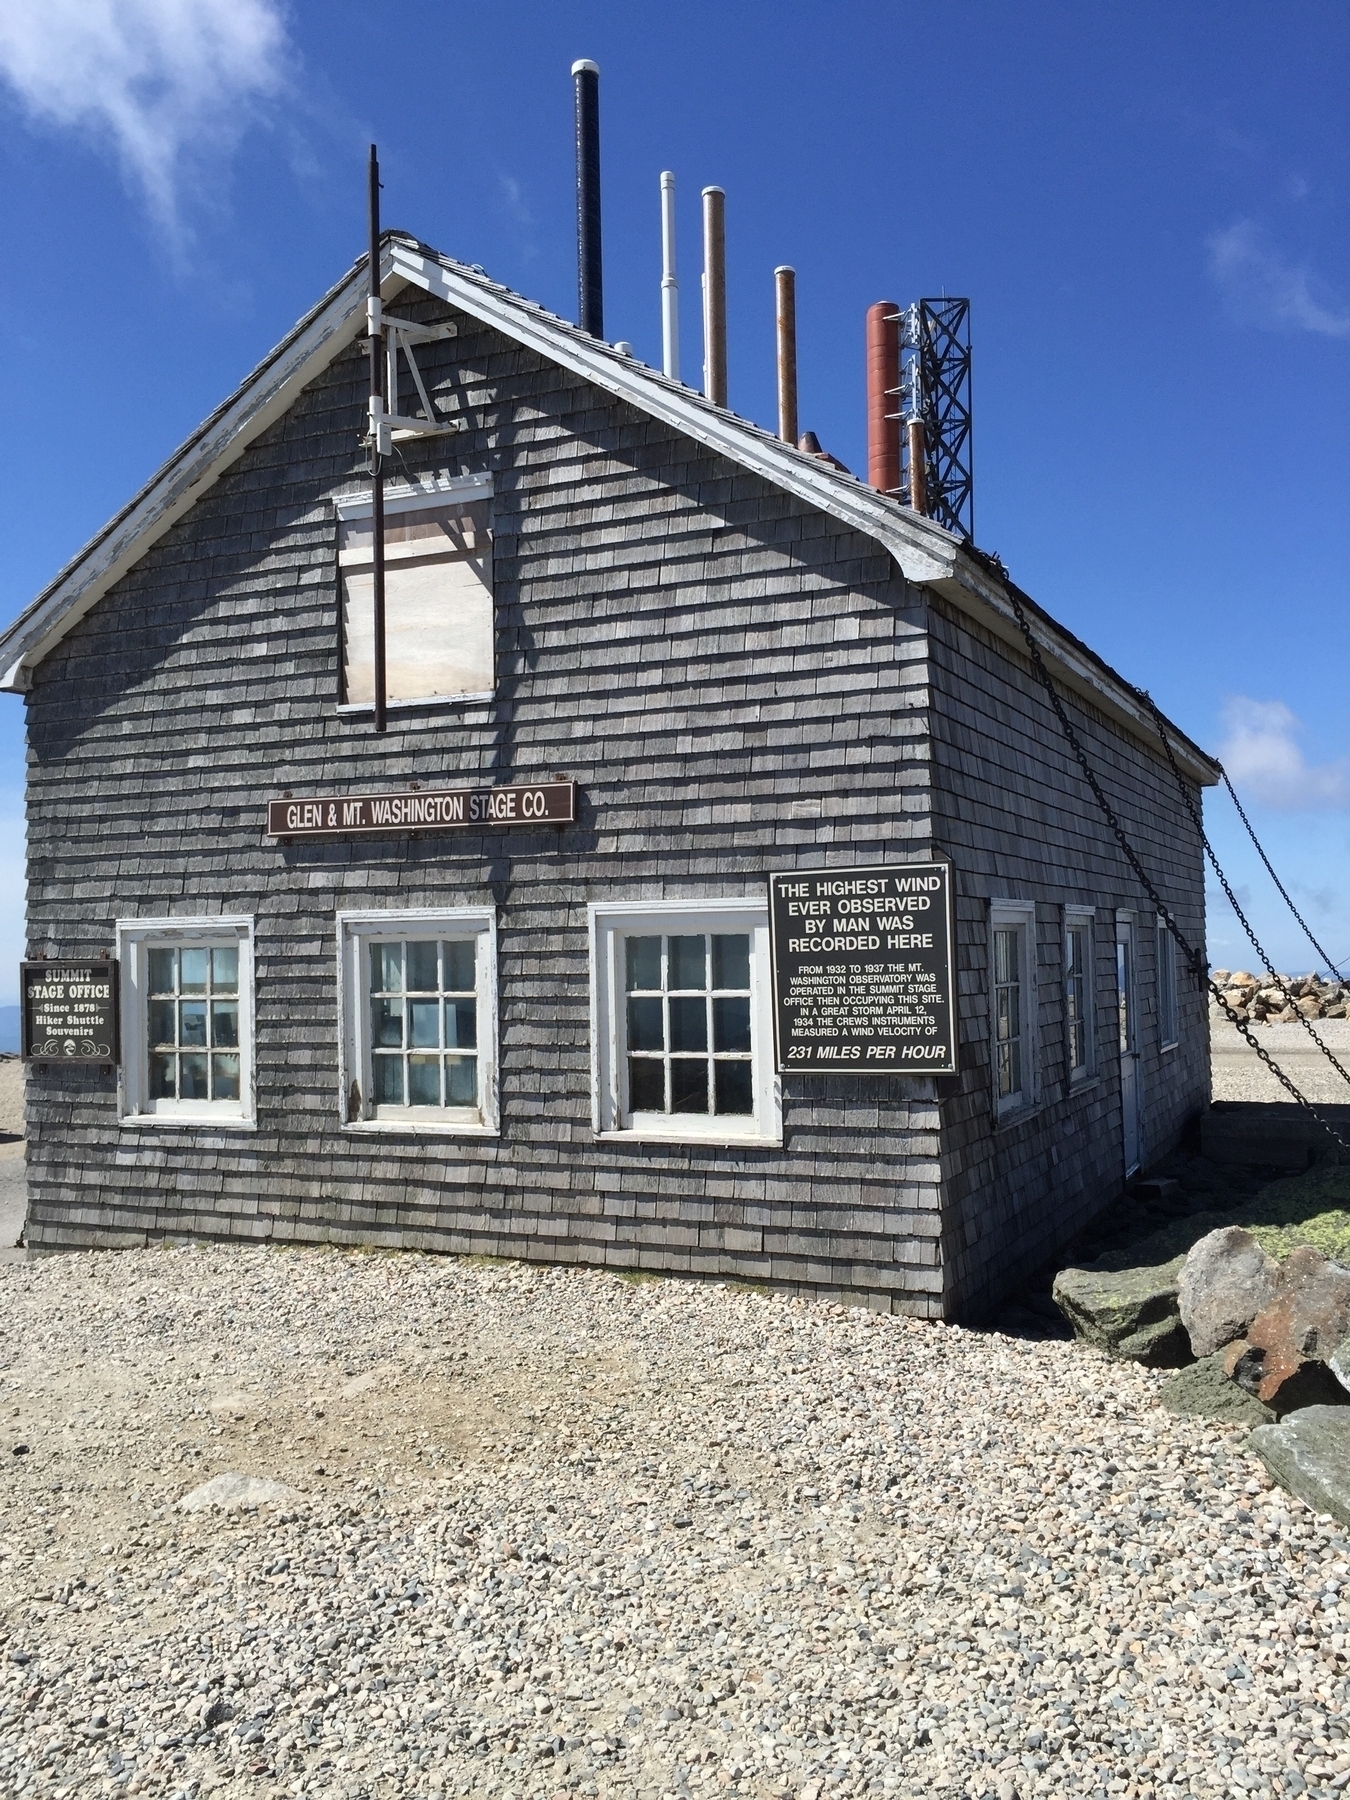 Wooden building on summit that has chains from its roof to the ground and features a sign describing the record setting 231mph winds that were recorded here.